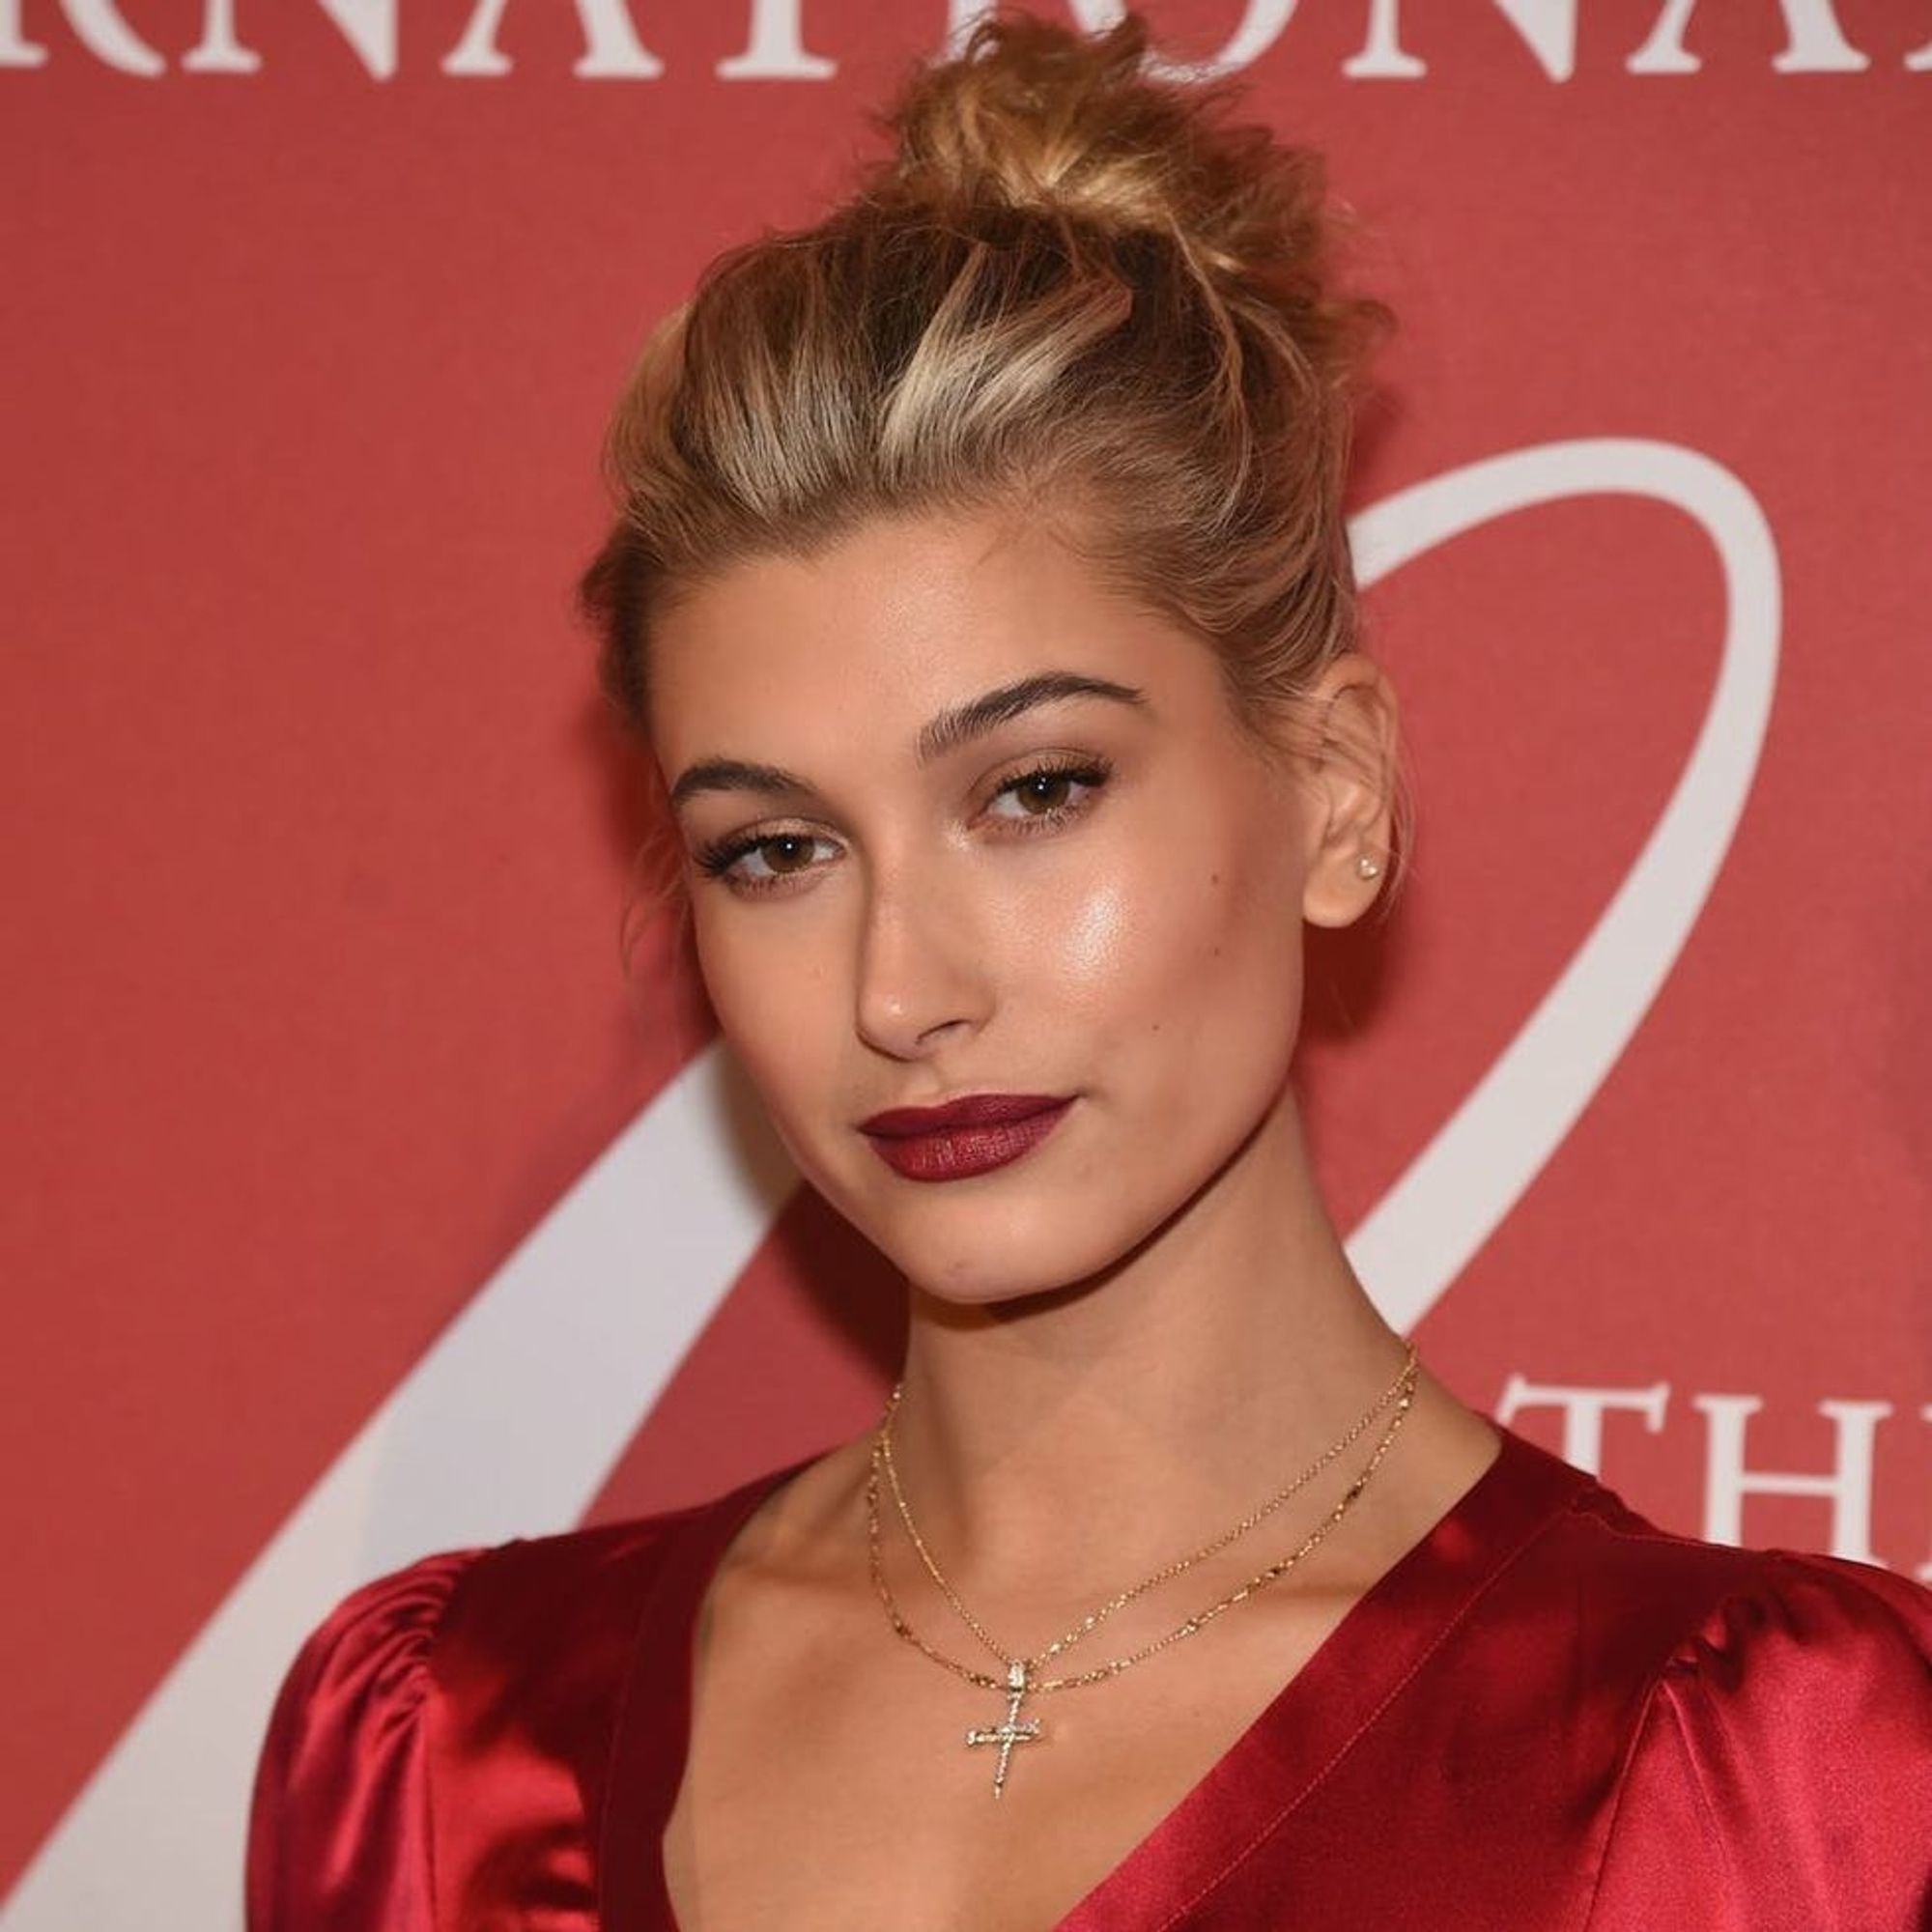 Hailey Baldwin S New Pretty In Pink Locks Are Fall Hairgoals Brit Co